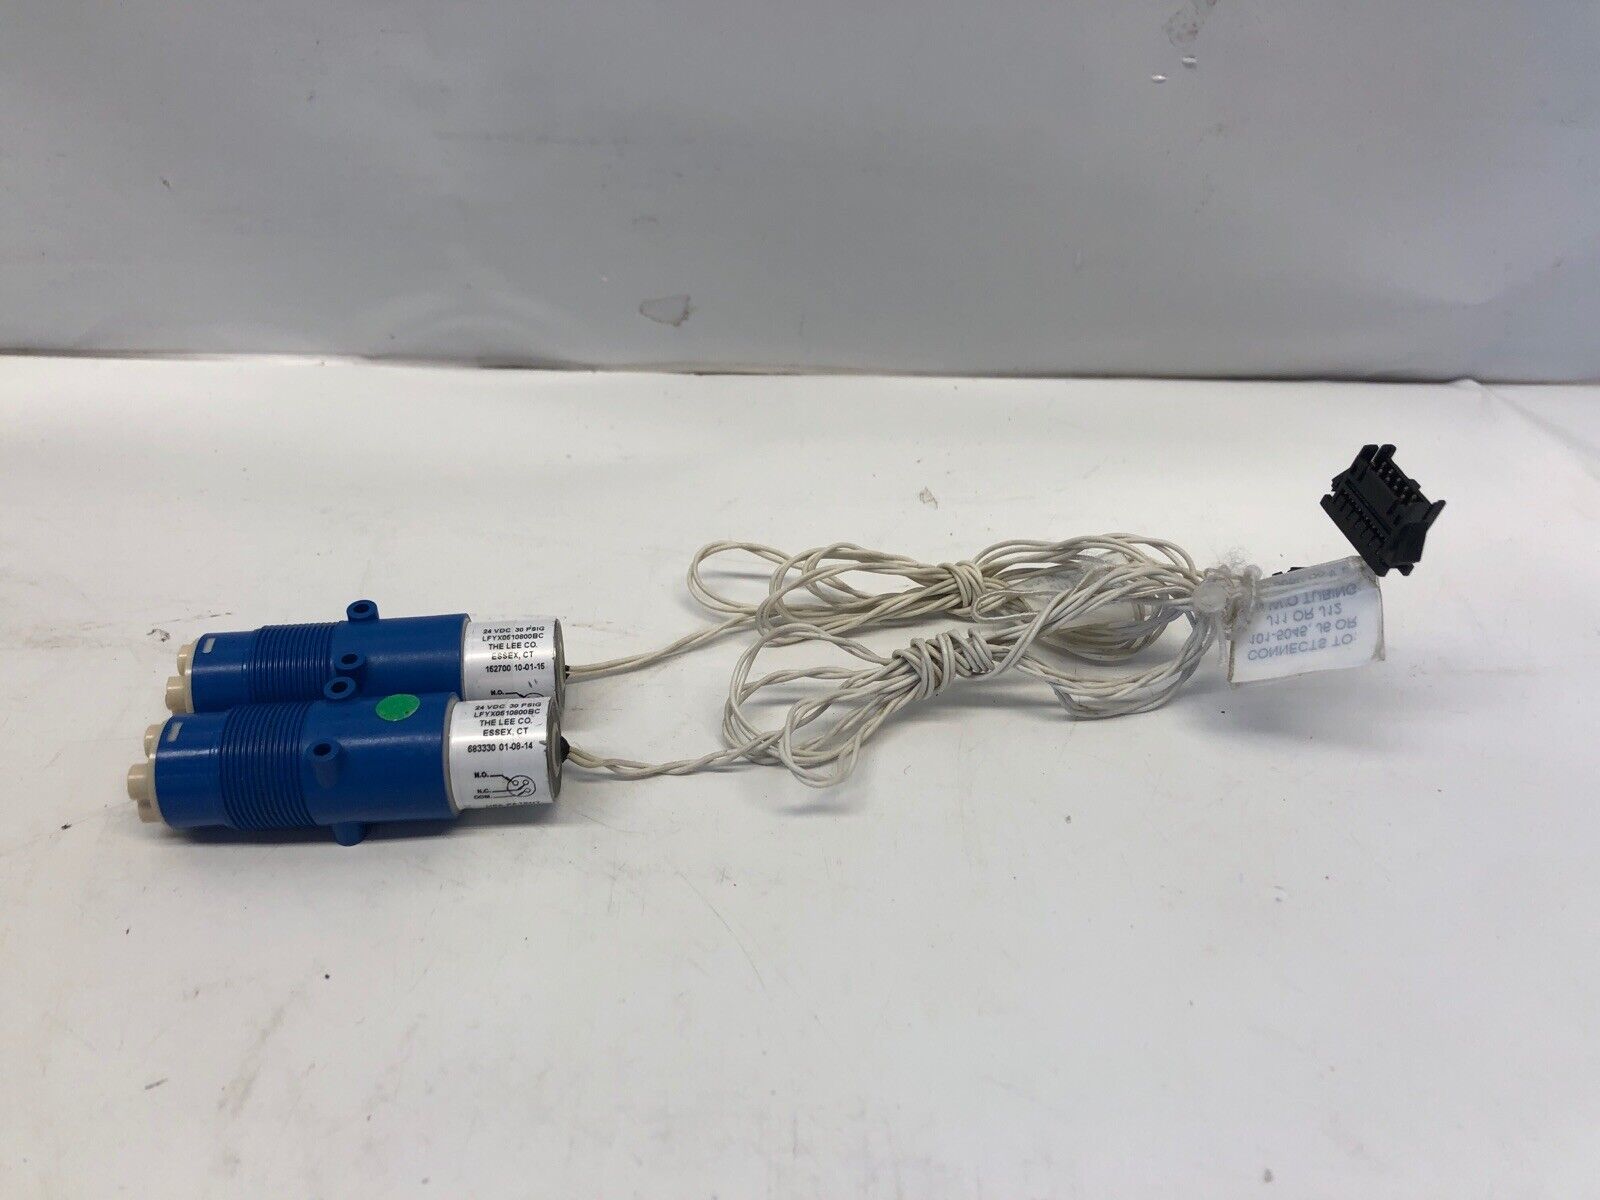 The Lee Co. SOLENOID LFYX0510800BC 24 VDC 30 PSIG (LOT 2)